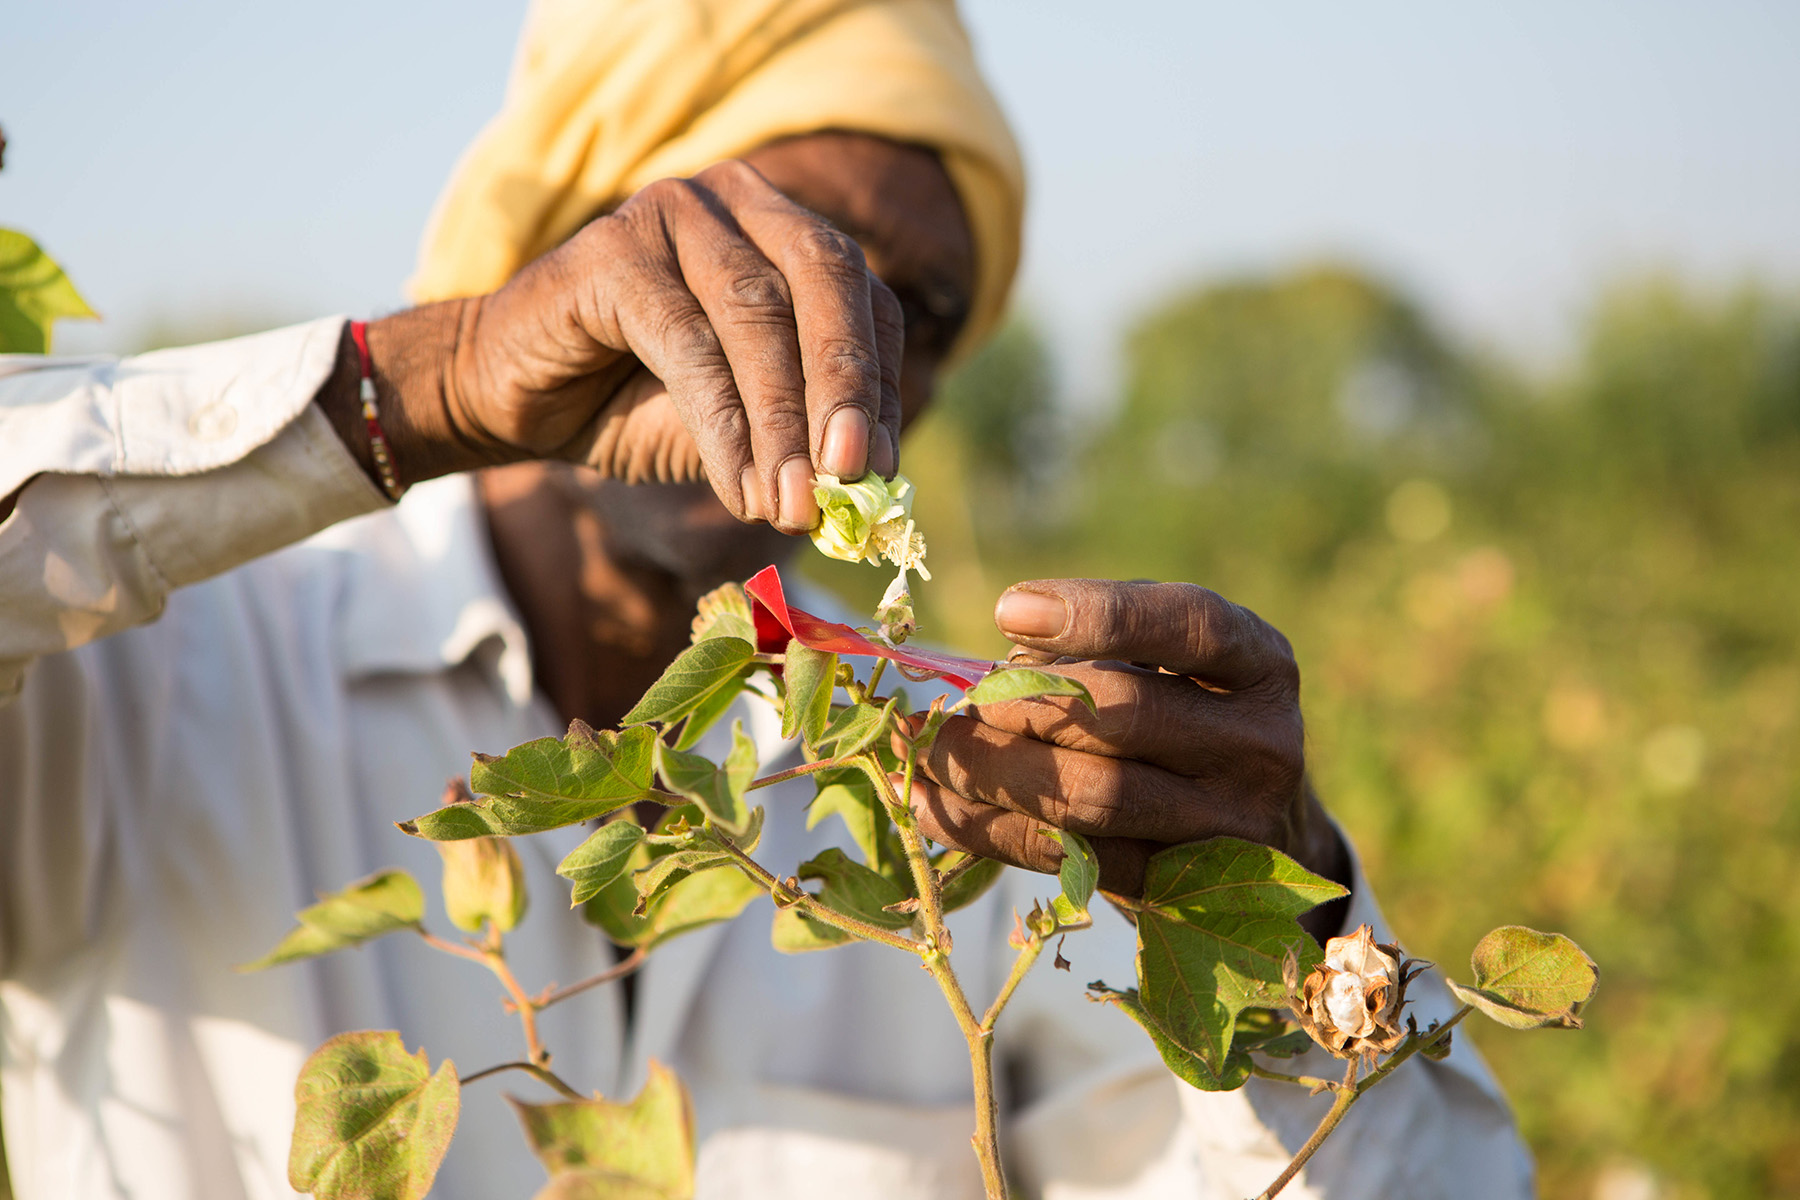 CottonConnect: Working with Farmers to Enhance Organic Cotton Practices